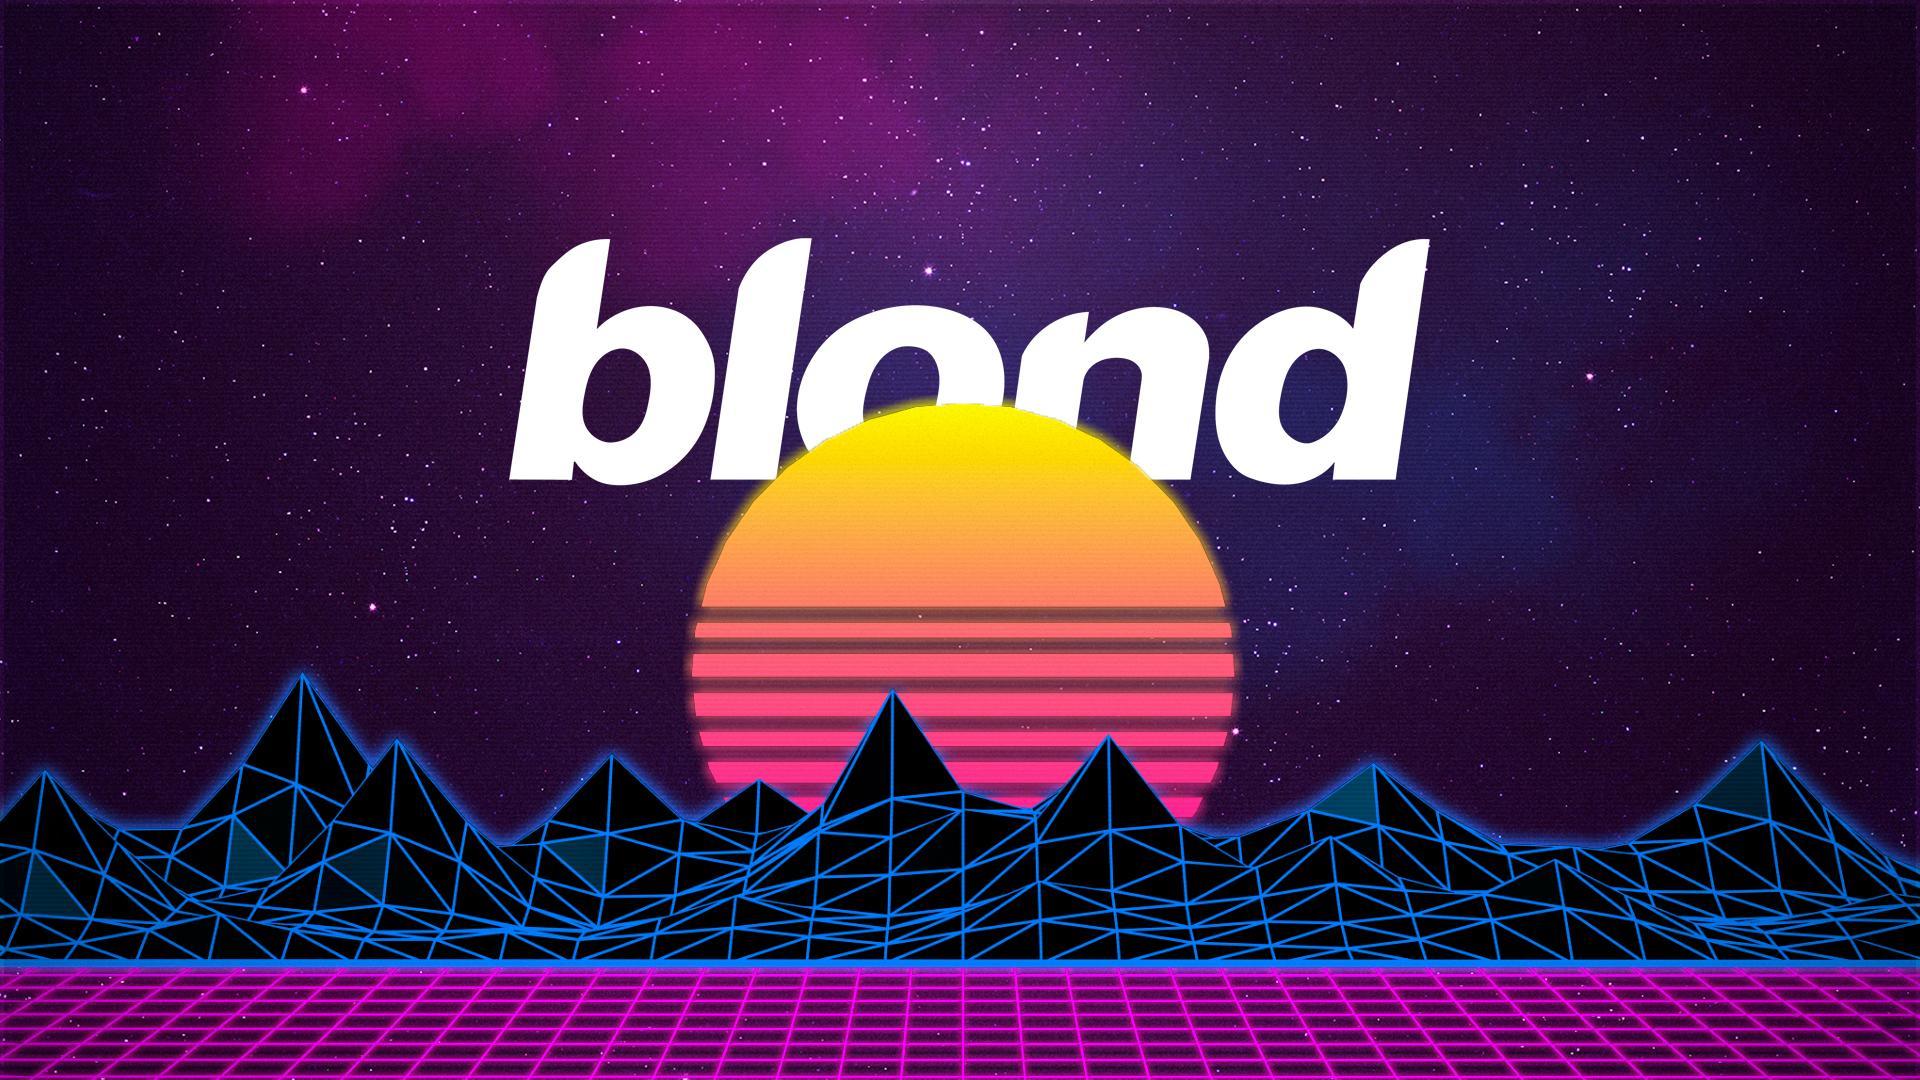 Added blond onto my favorite wallpaper, for you guys